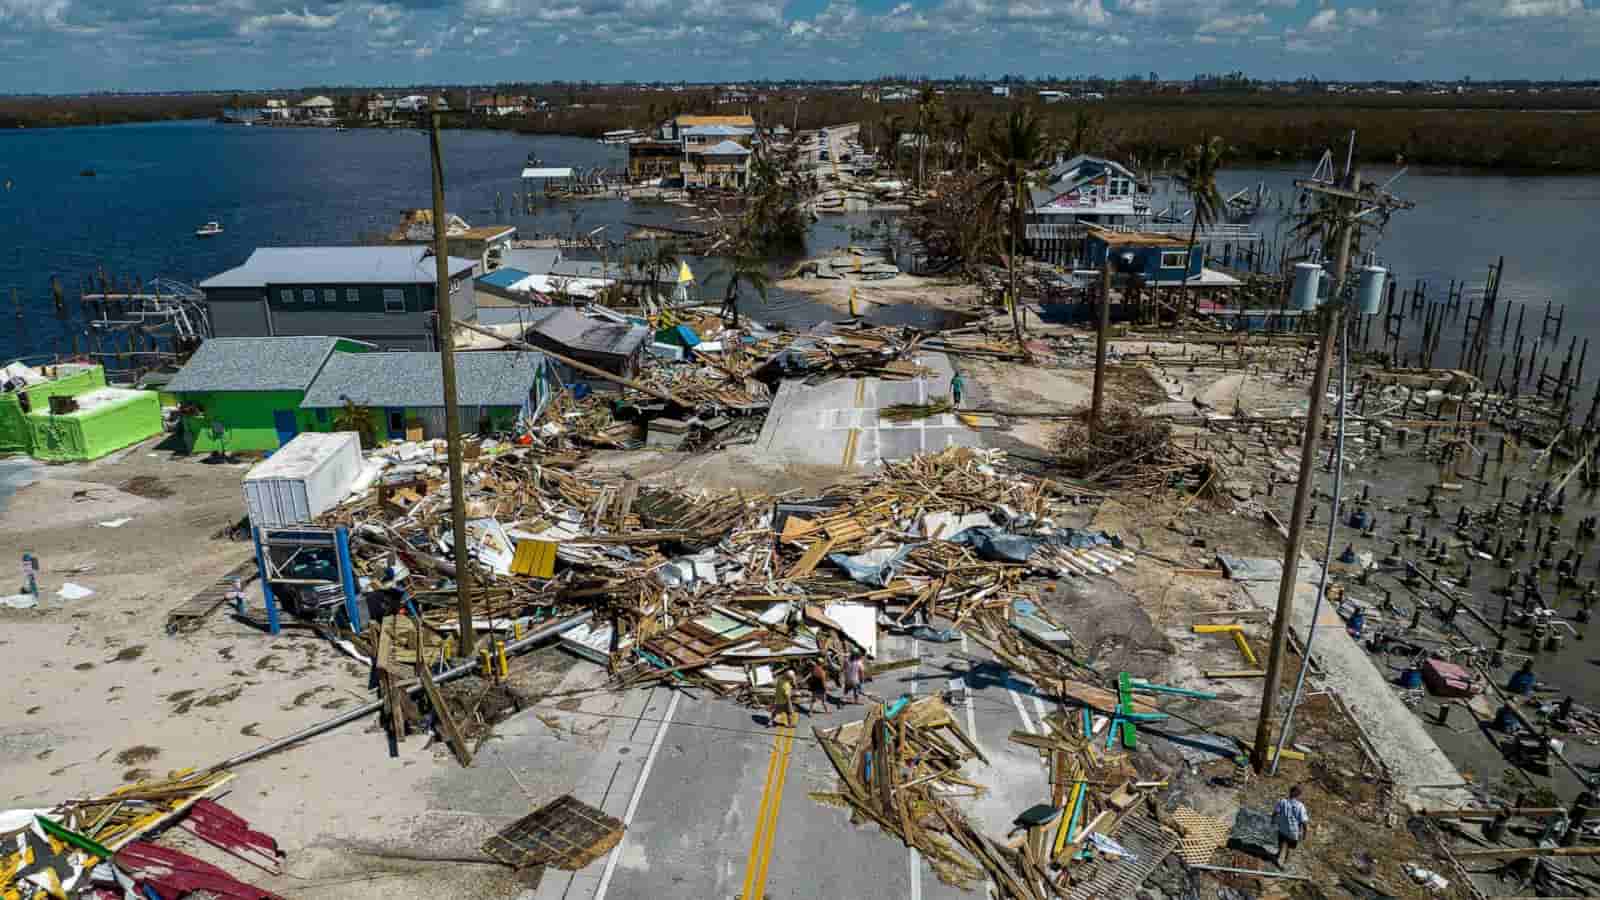 Florida lawmakers urged the US President to support the emergency funding intended for the families affected by Hurricane Ian. They express the needs of the affected families through a letter and ask the president for a million-dollar budget for disaster relief.